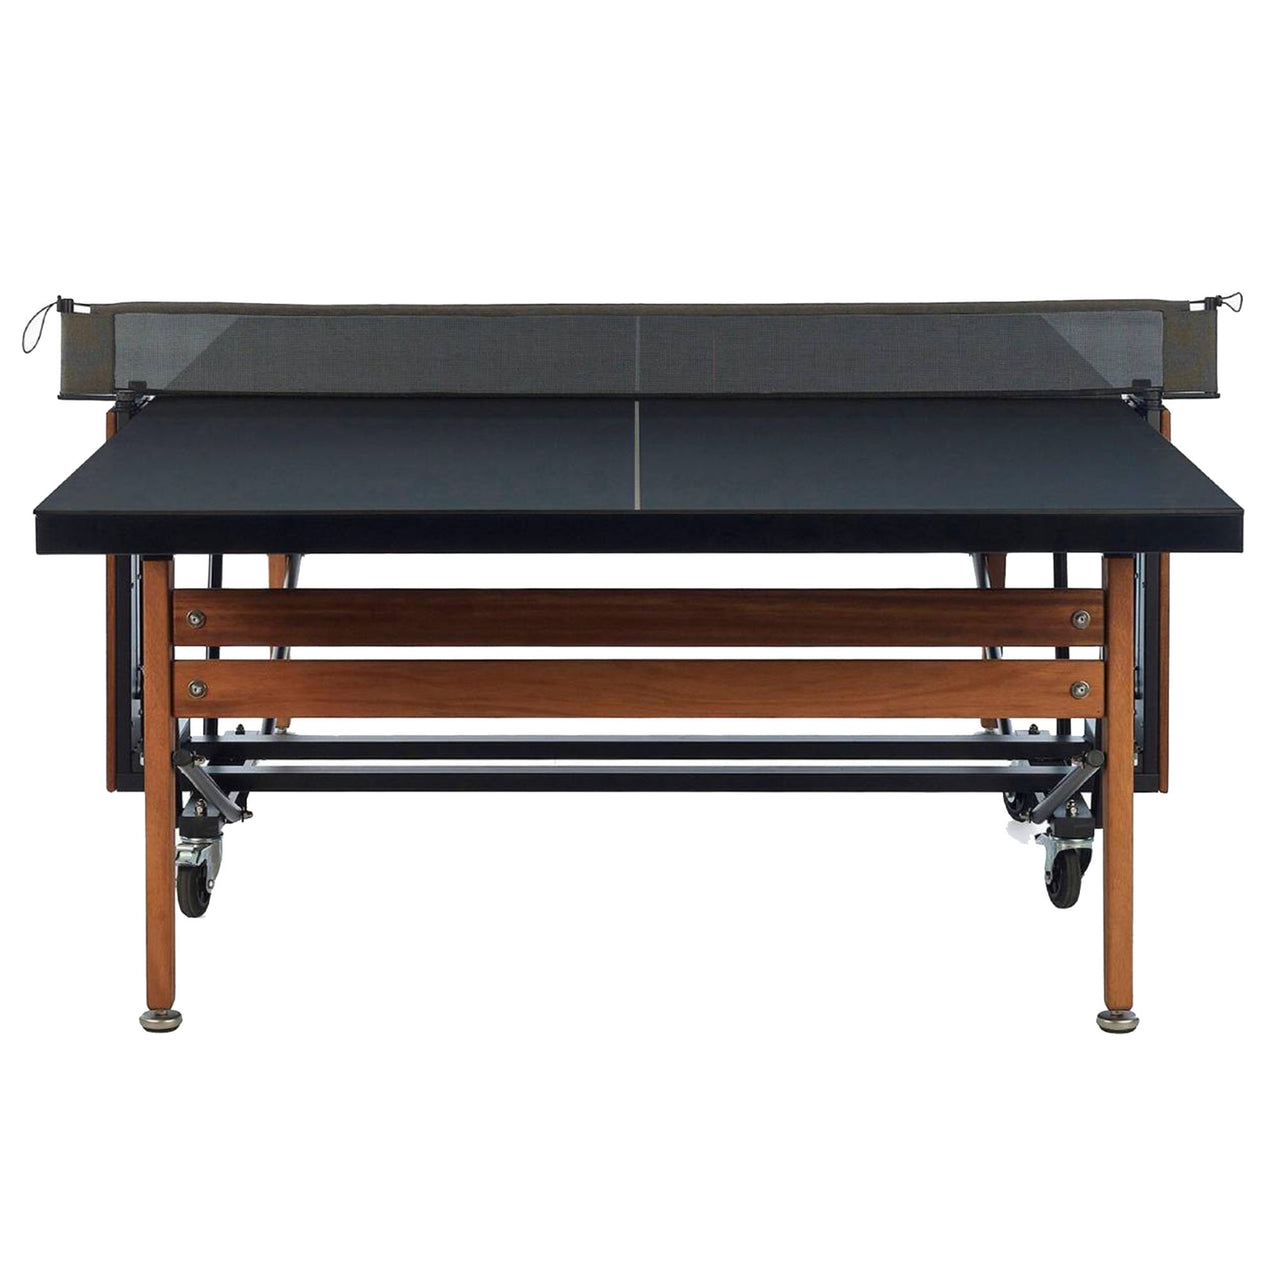 RS Folding Ping Pong Table: Indoor/Outdoor: Black